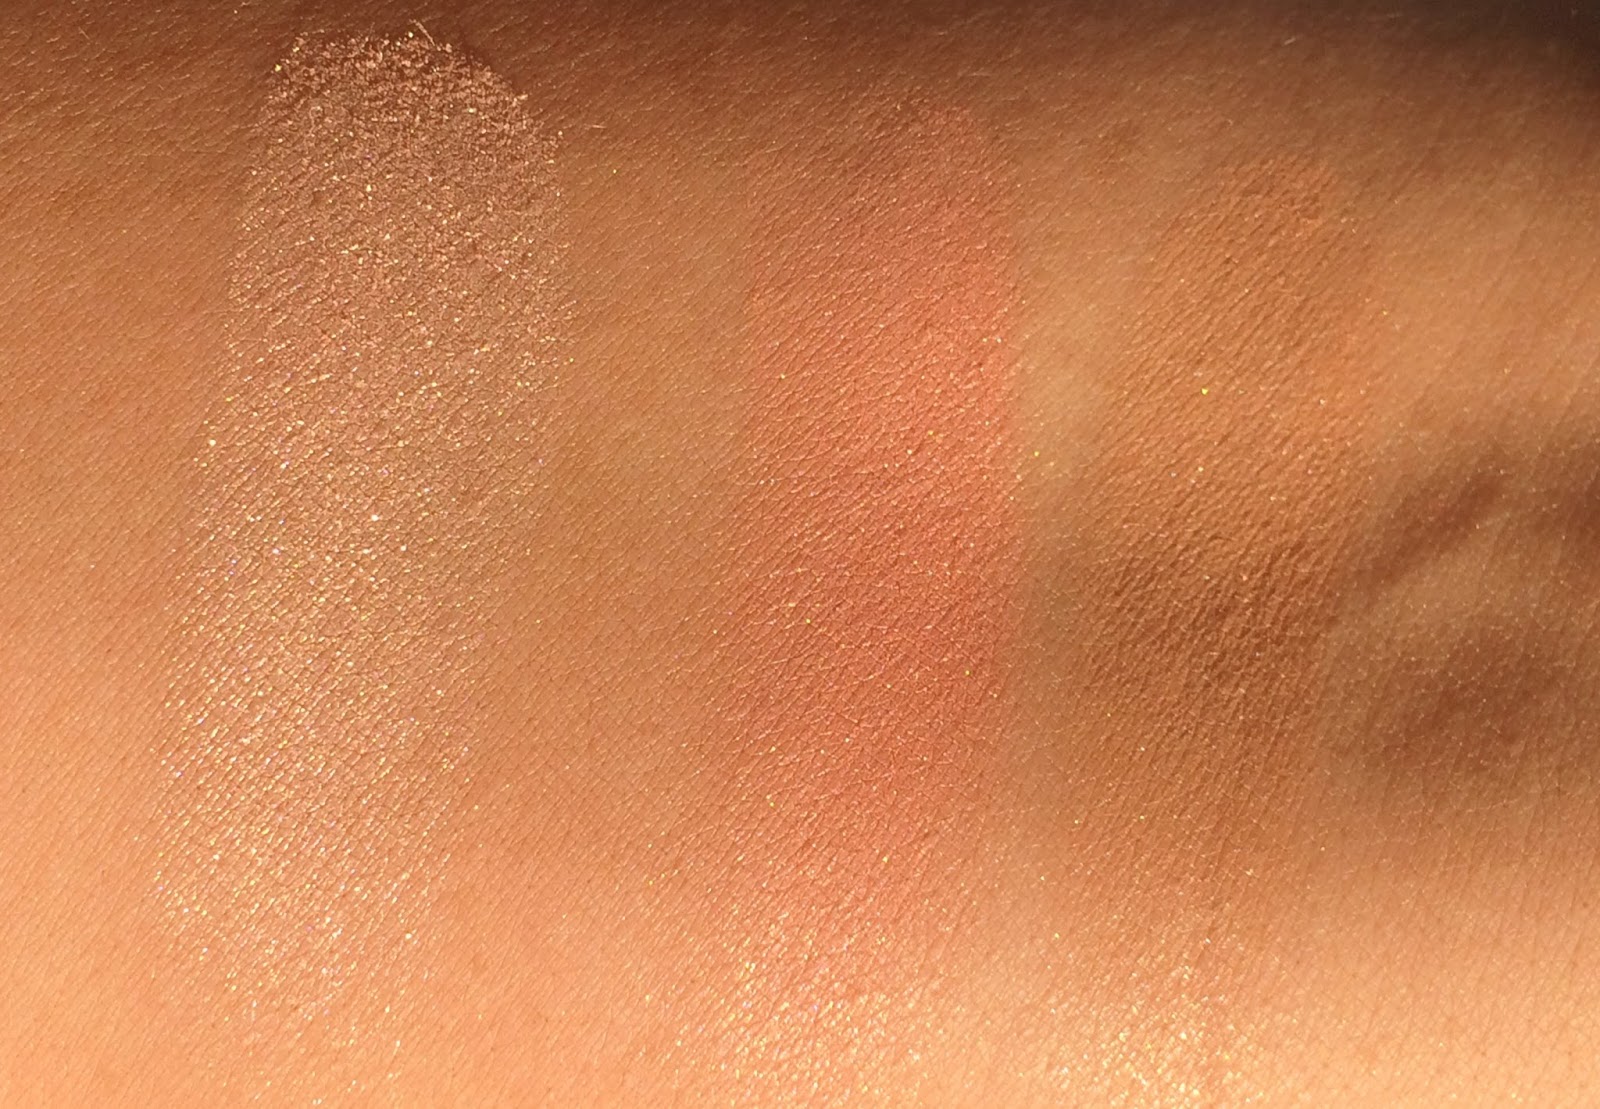 Too Faced Sweet Peach Glow Palette Swatches